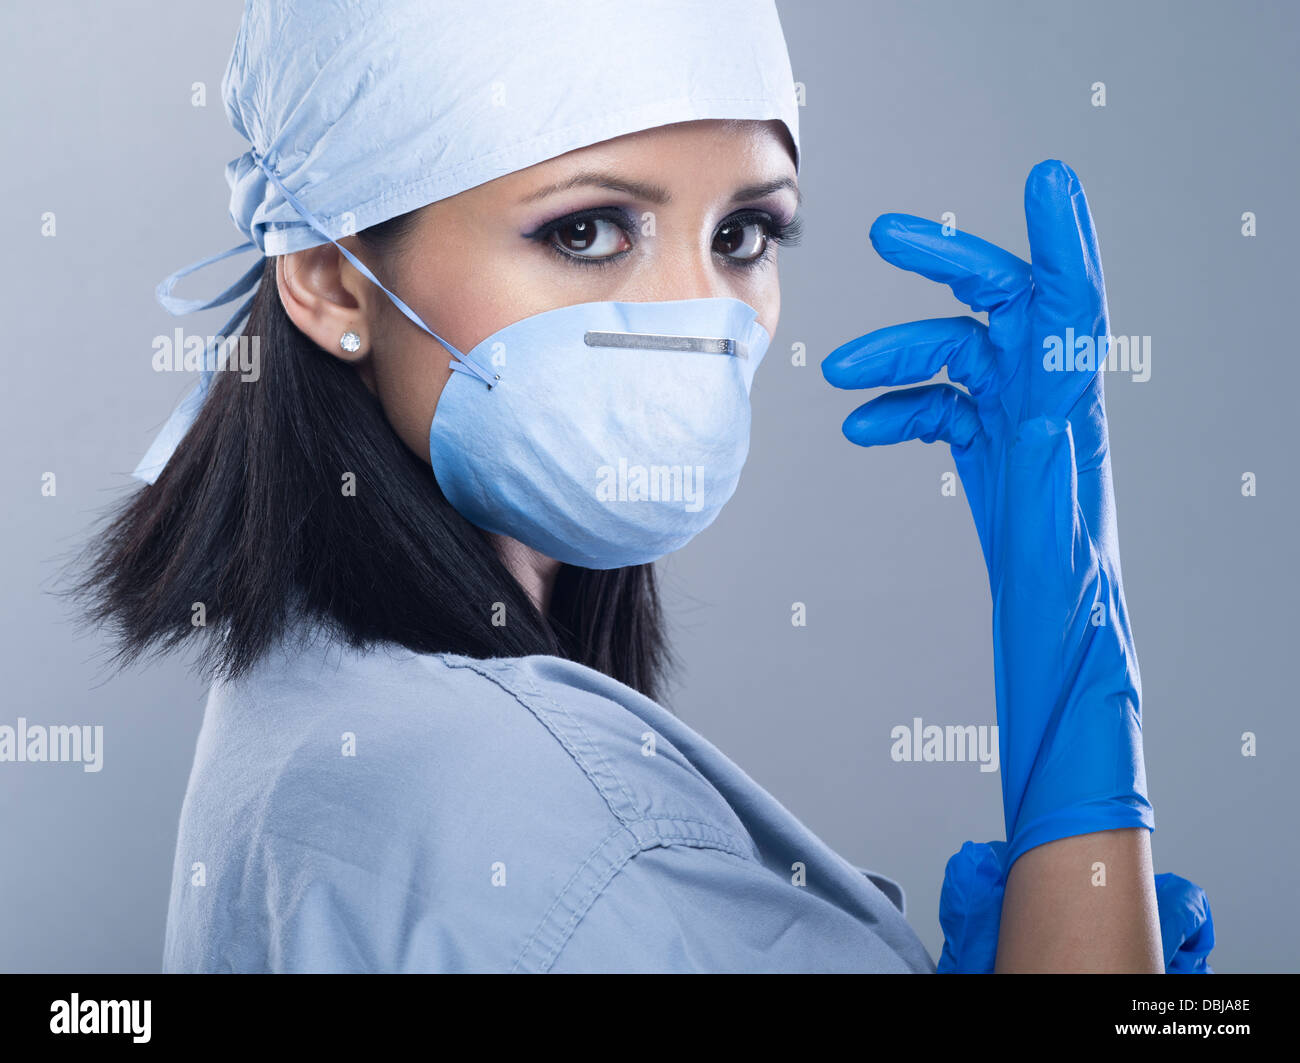 Female Nurse / Doctor / Surgeon wearing scrubs with gloves and mask Stock Photo